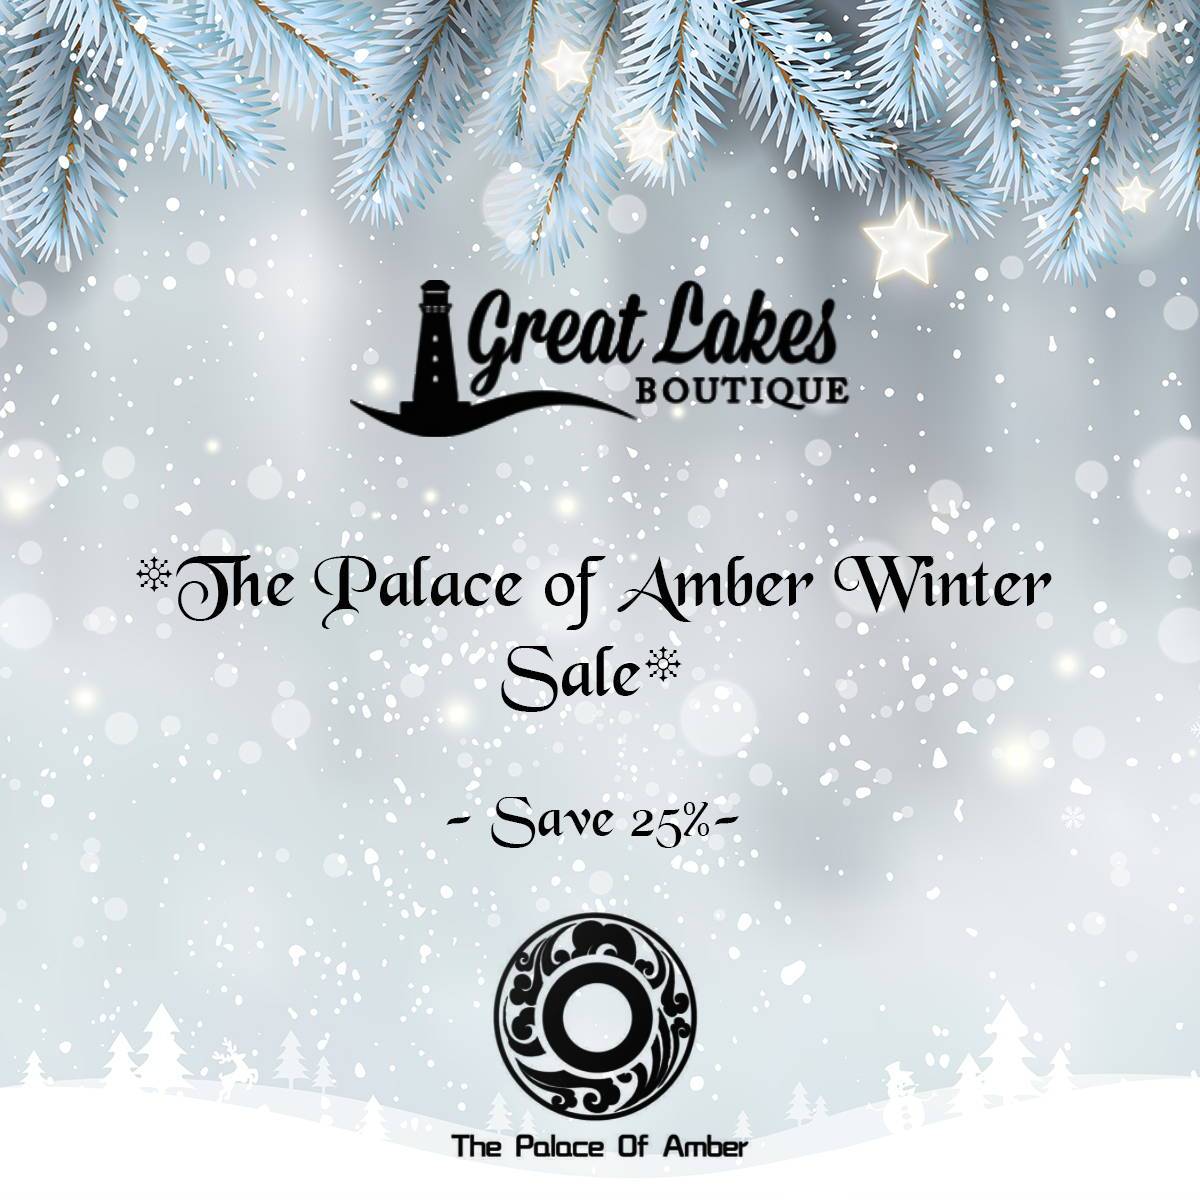 The Palace of Amber Winter 2019 Sale Begins